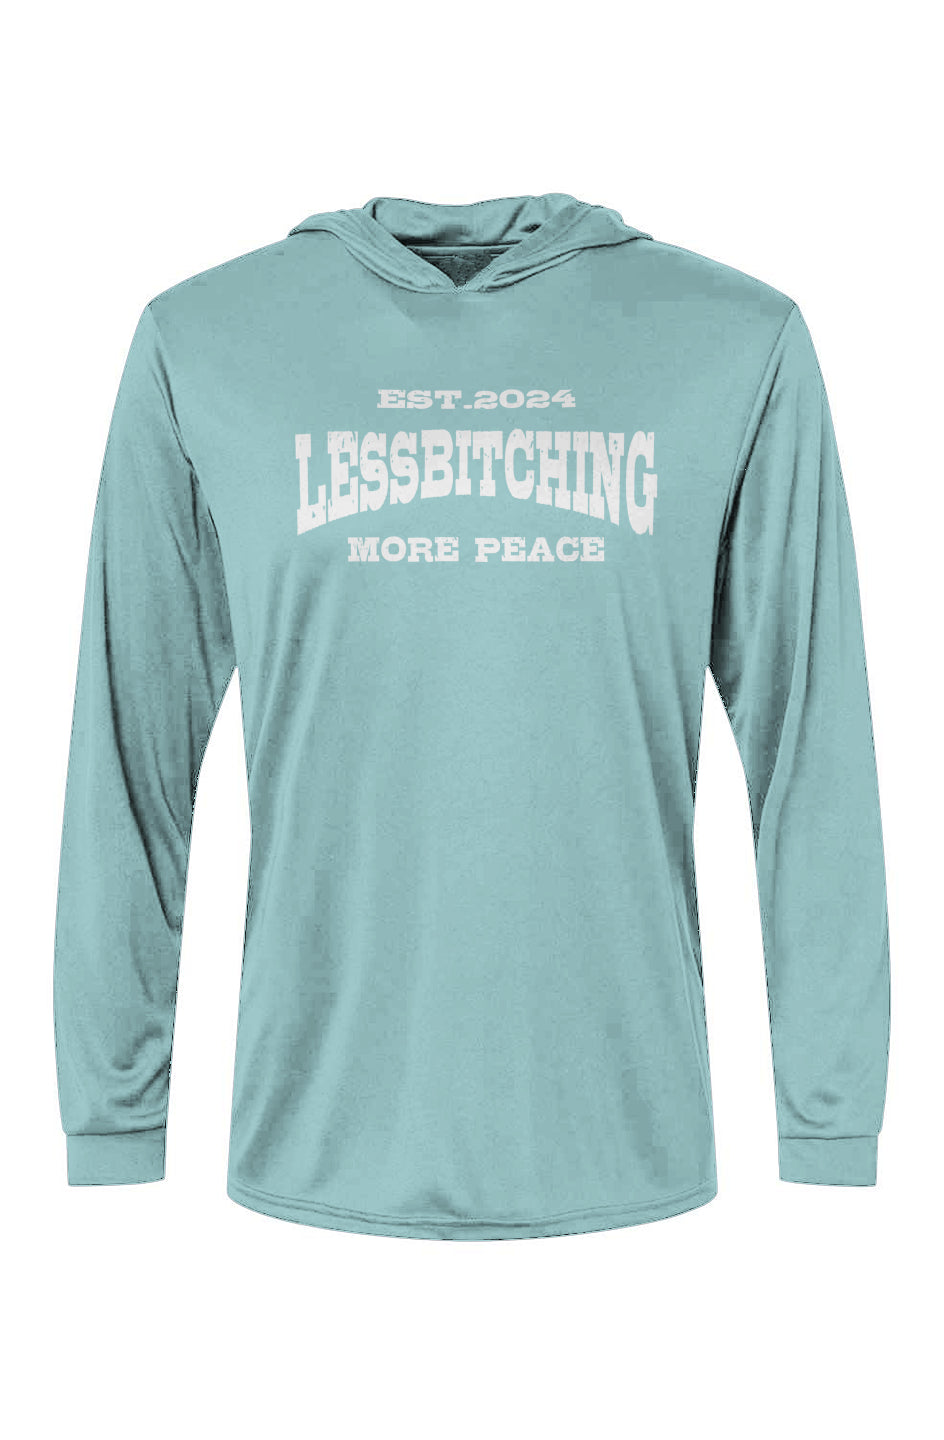 Bahama Hooded LS Tee less bitching more peace